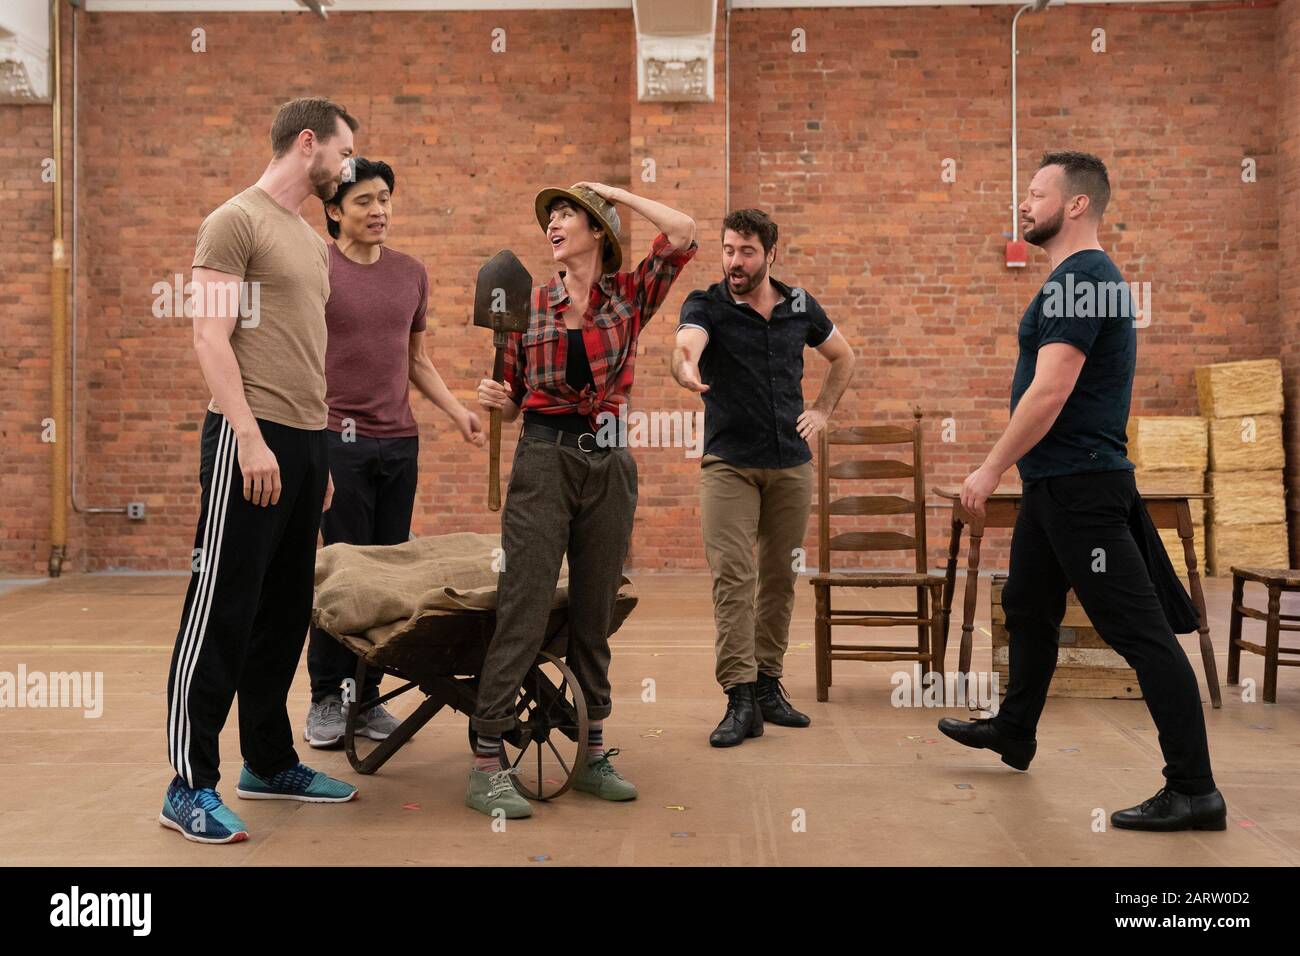 New York, NY, USA. 29th Jan, 2020. Alex Gibson, Paolo Montalban, Beth Malone, Omar Lopez-Cepero, Keven Quillon in attendance for THE UNSINKABLE MOLLY BROWN Preview Photo Call, Gibney Dance Choreographic Center Studios, New York, NY January 29, 2020. Credit: Jason Smith/Everett Collection/Alamy Live News Stock Photo